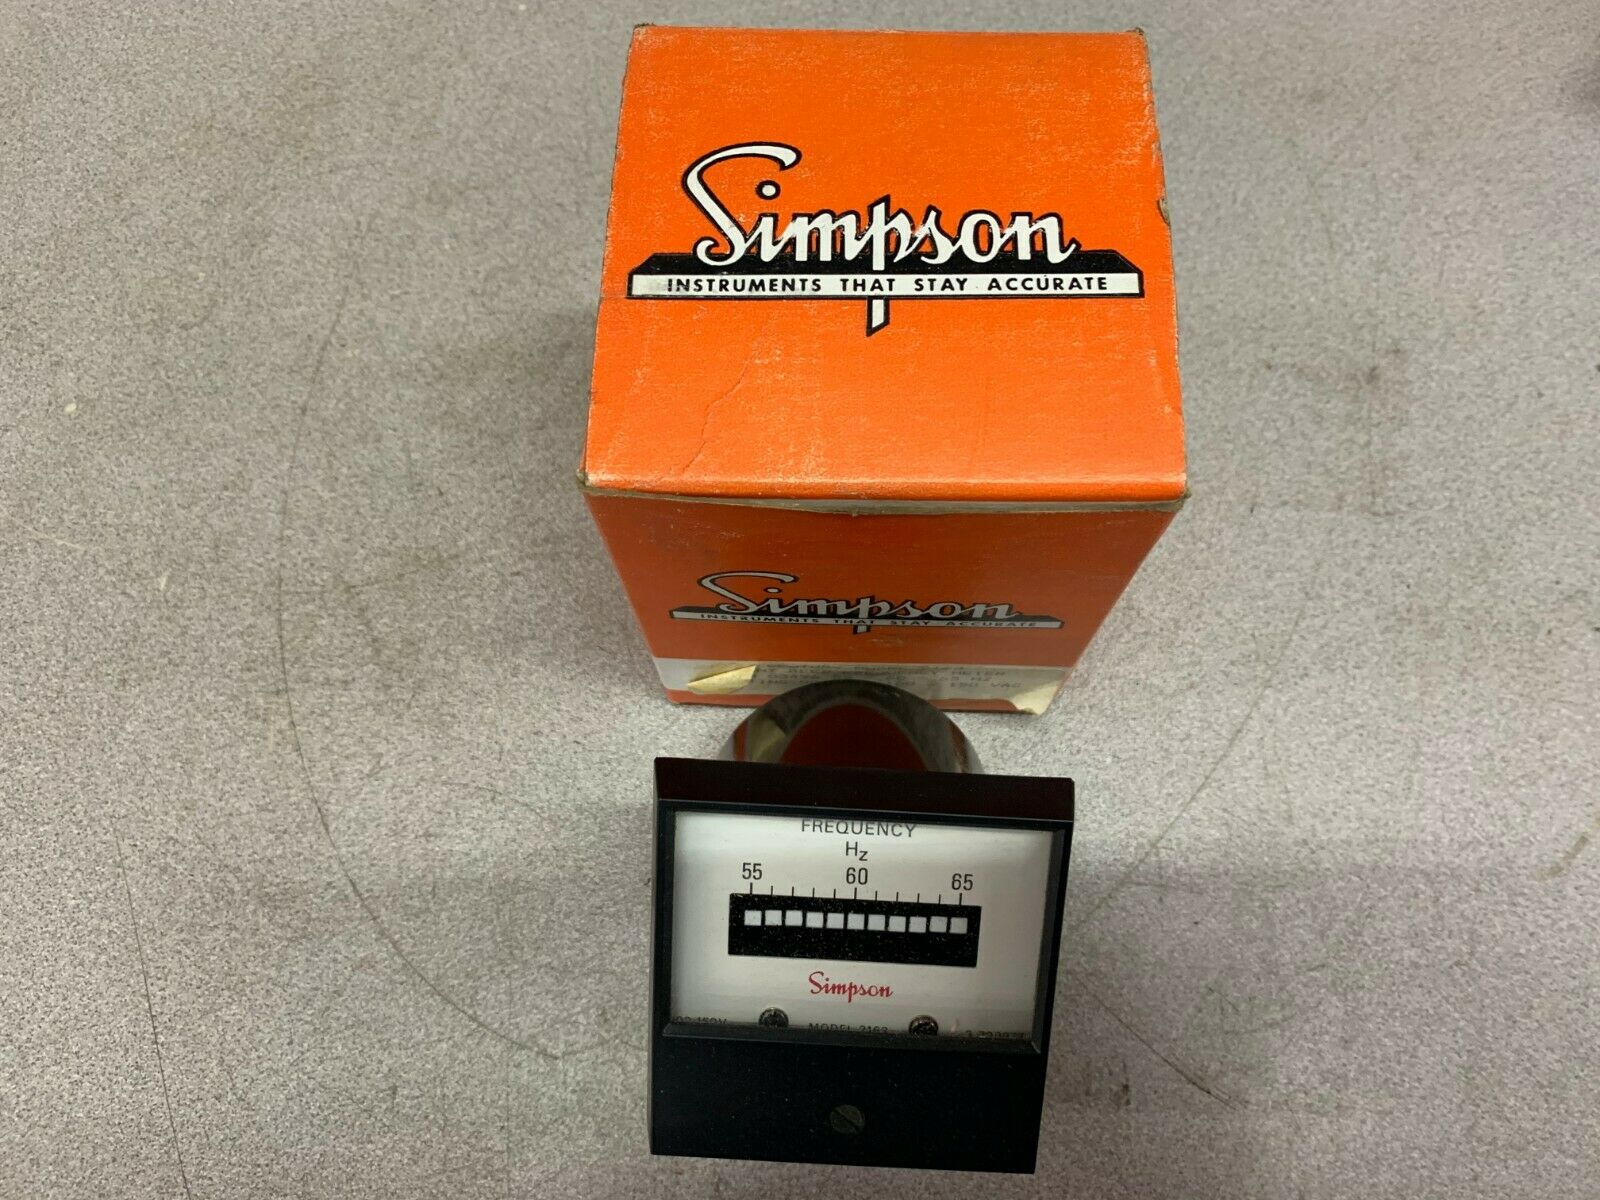 NEW IN BOX SIMPSON FREQUENCY METER 03496